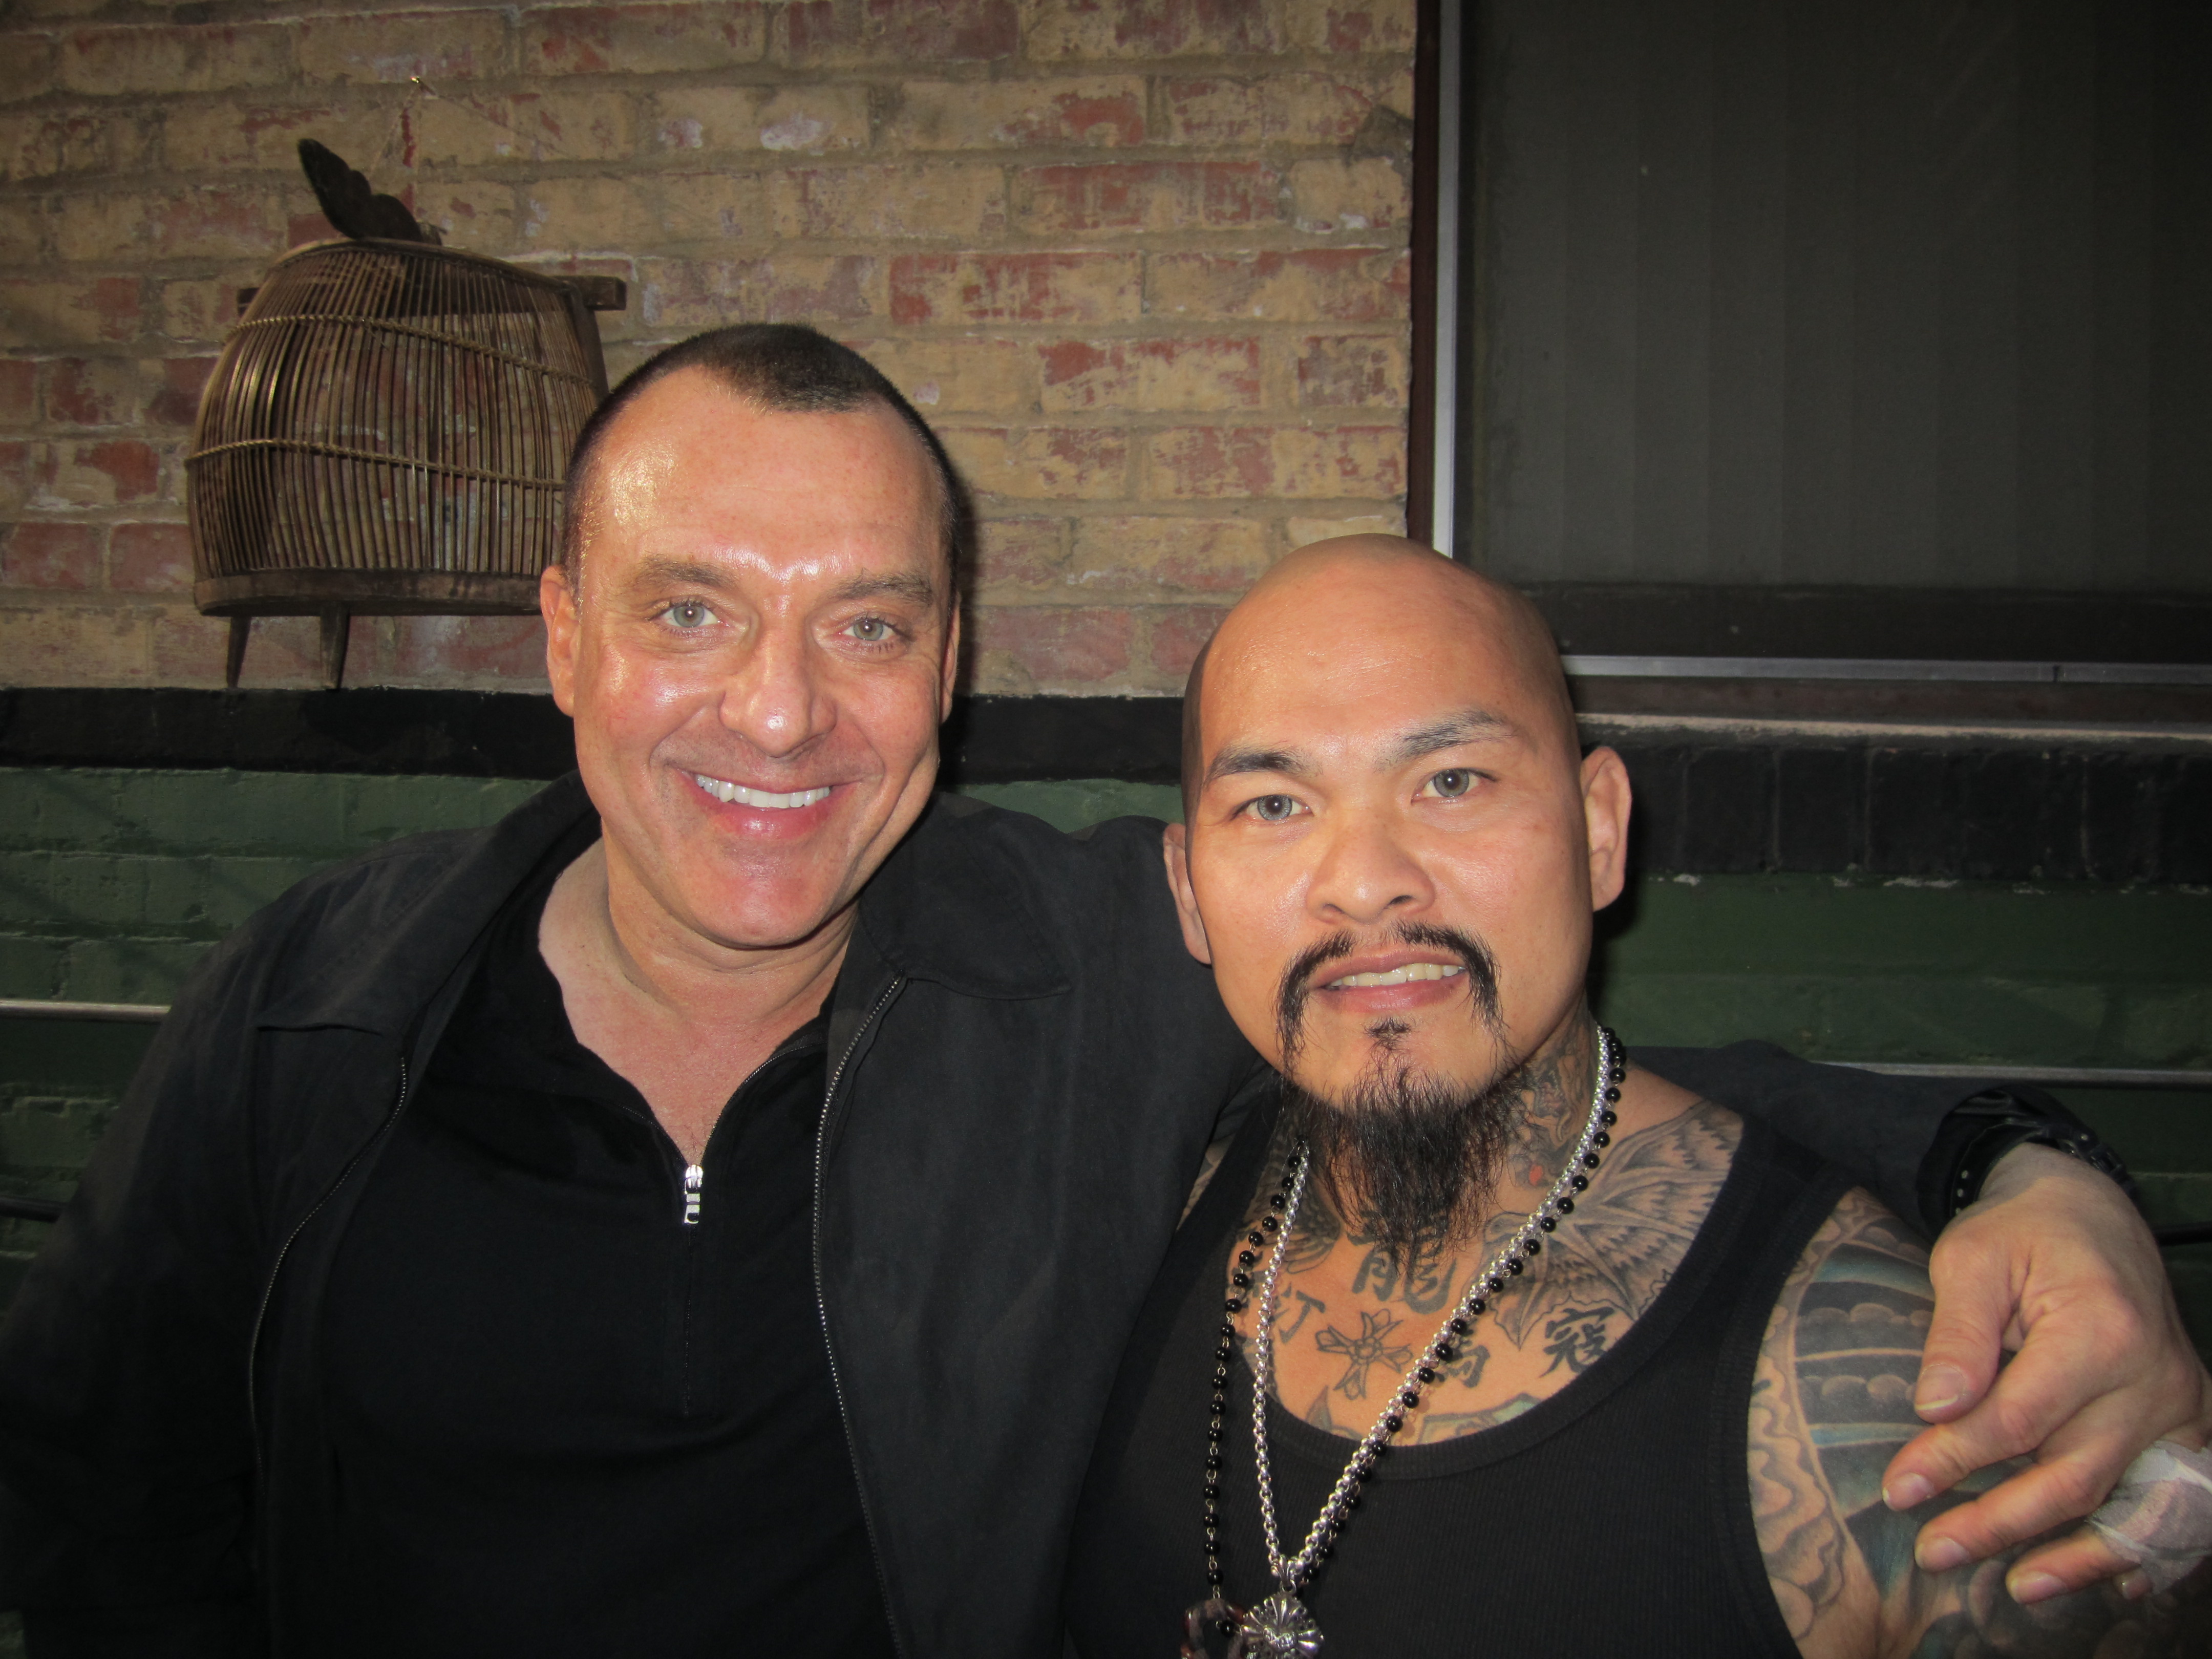 Actor, Producer, and Director Tom Sizemore! Outstanding great actor and director!The Best of the Bests! Love this guy! Check out his films! http://www.imdb.com/name/nm0001744/